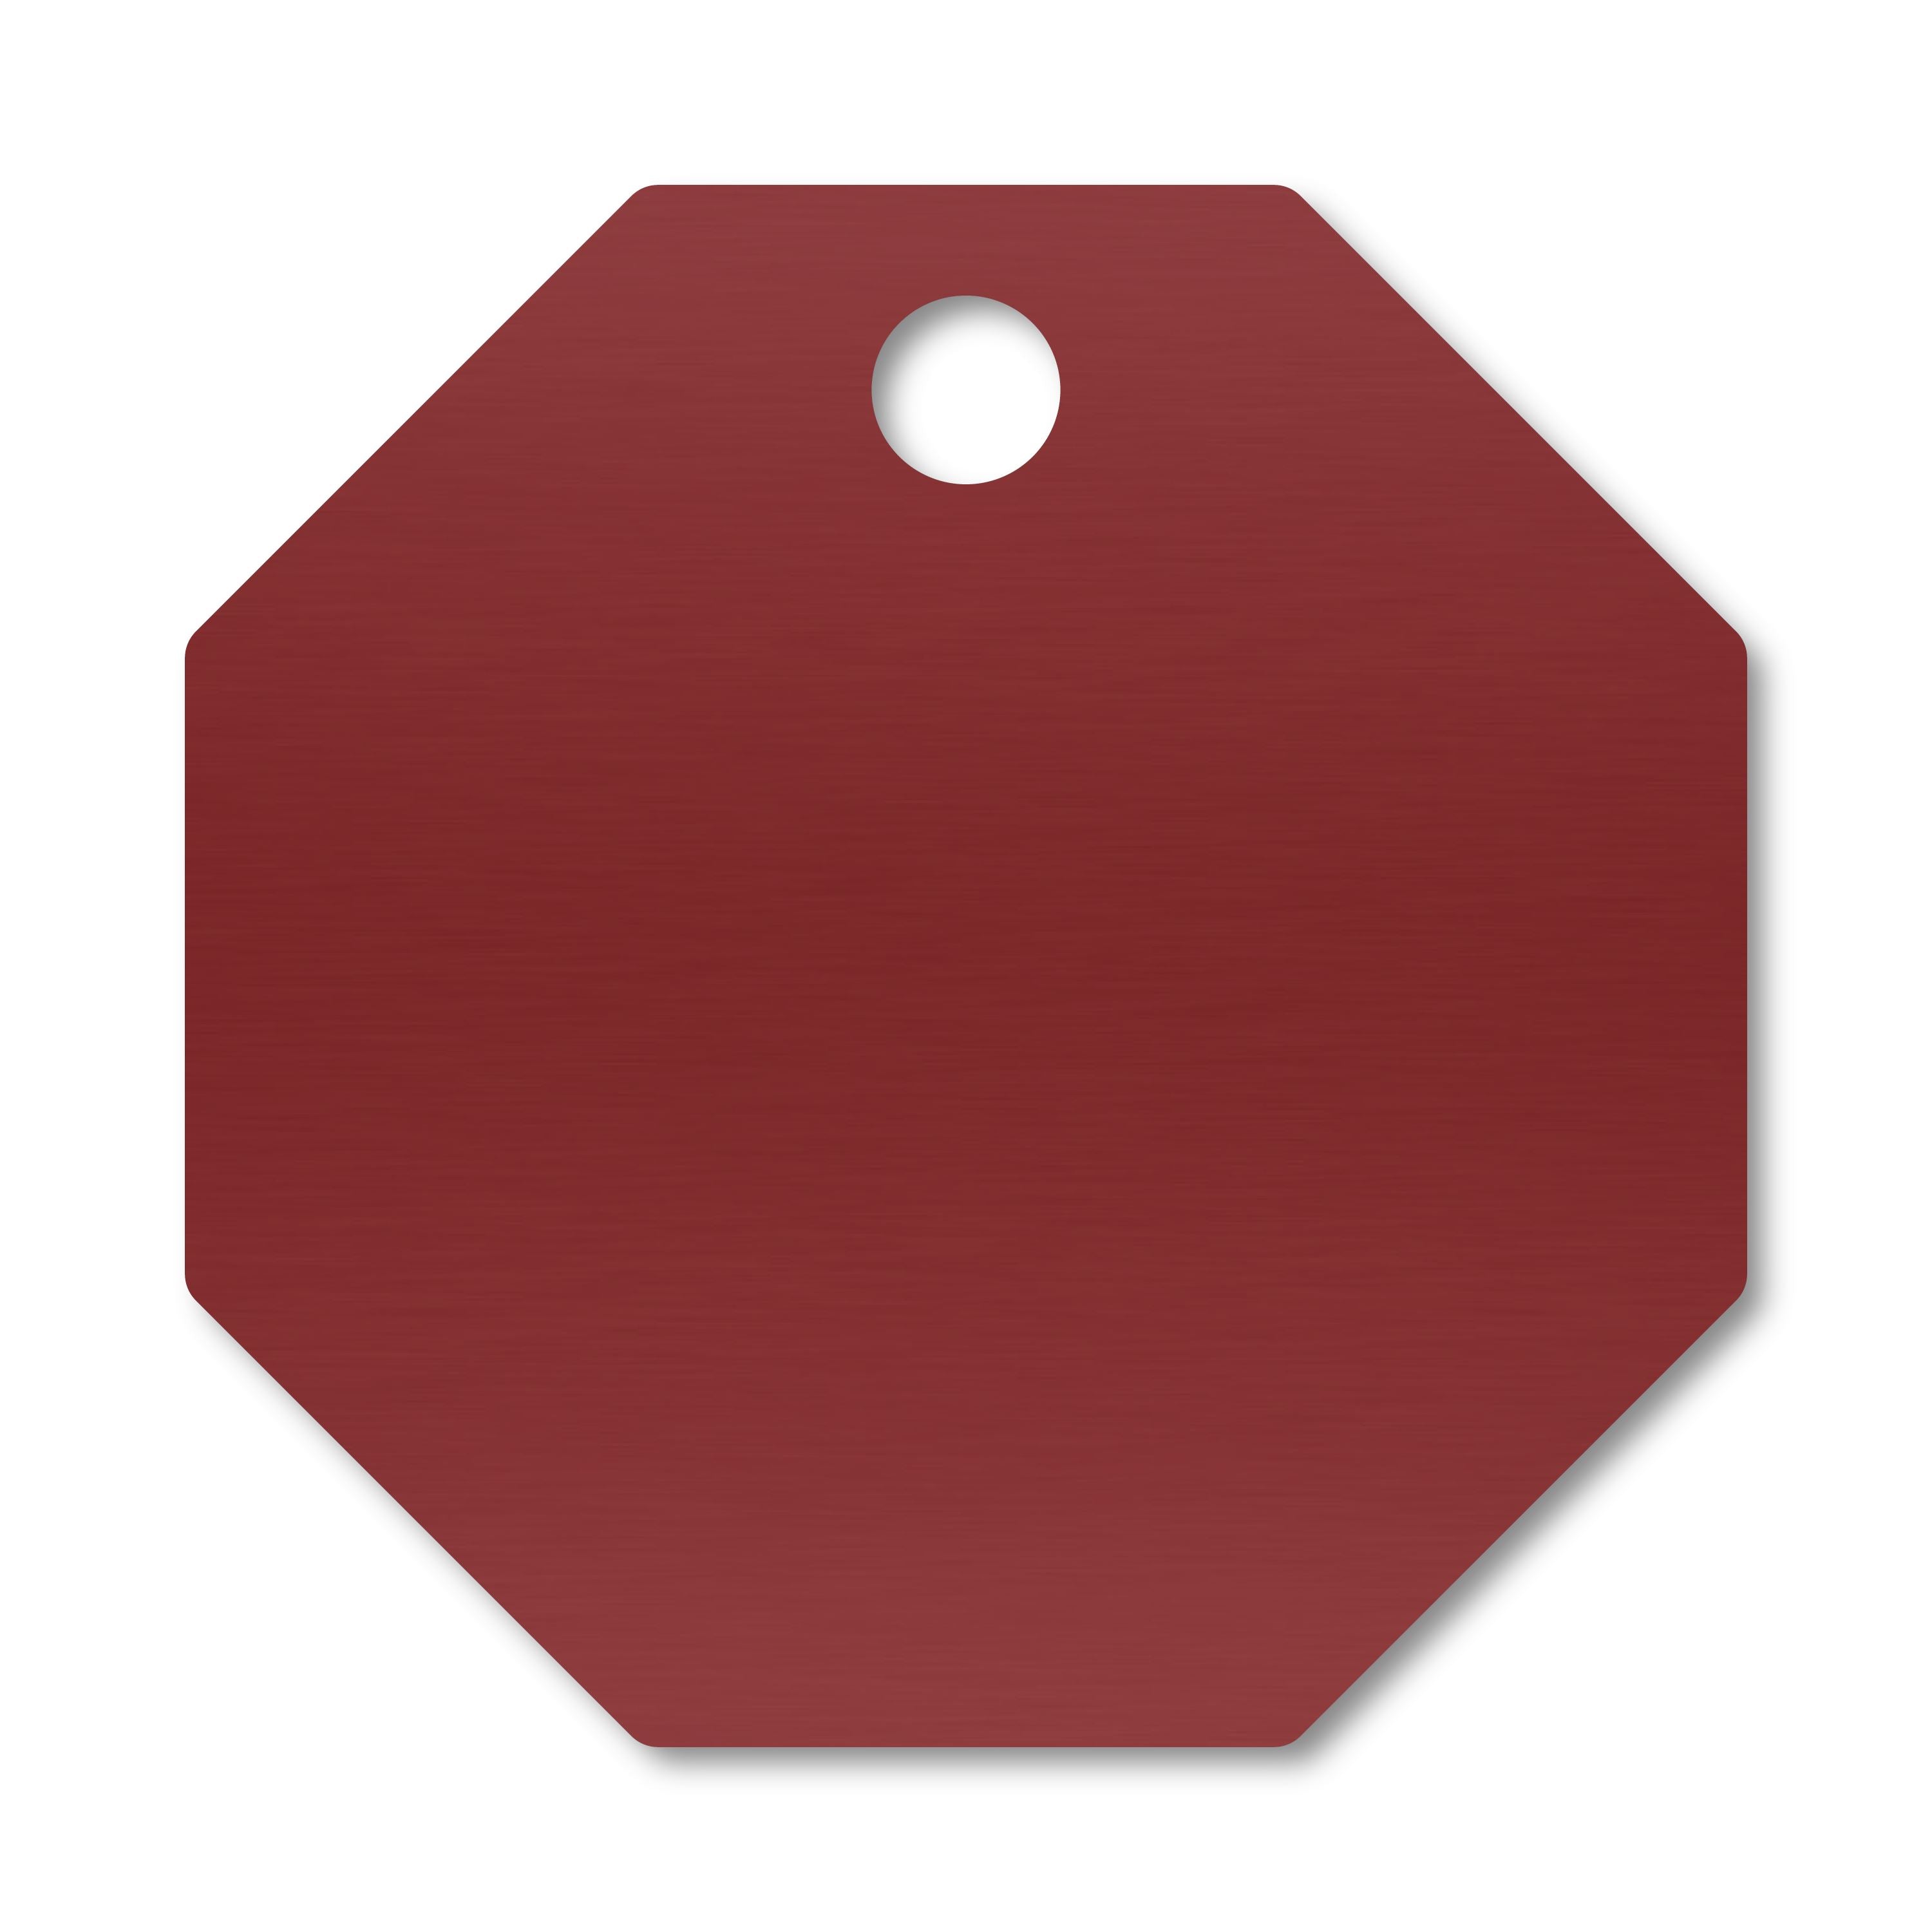 Anodized Aluminum Octagon Tags, 1" with 3/32" Hole, Laser Engraved Metal Tags Craftworks NW Red 